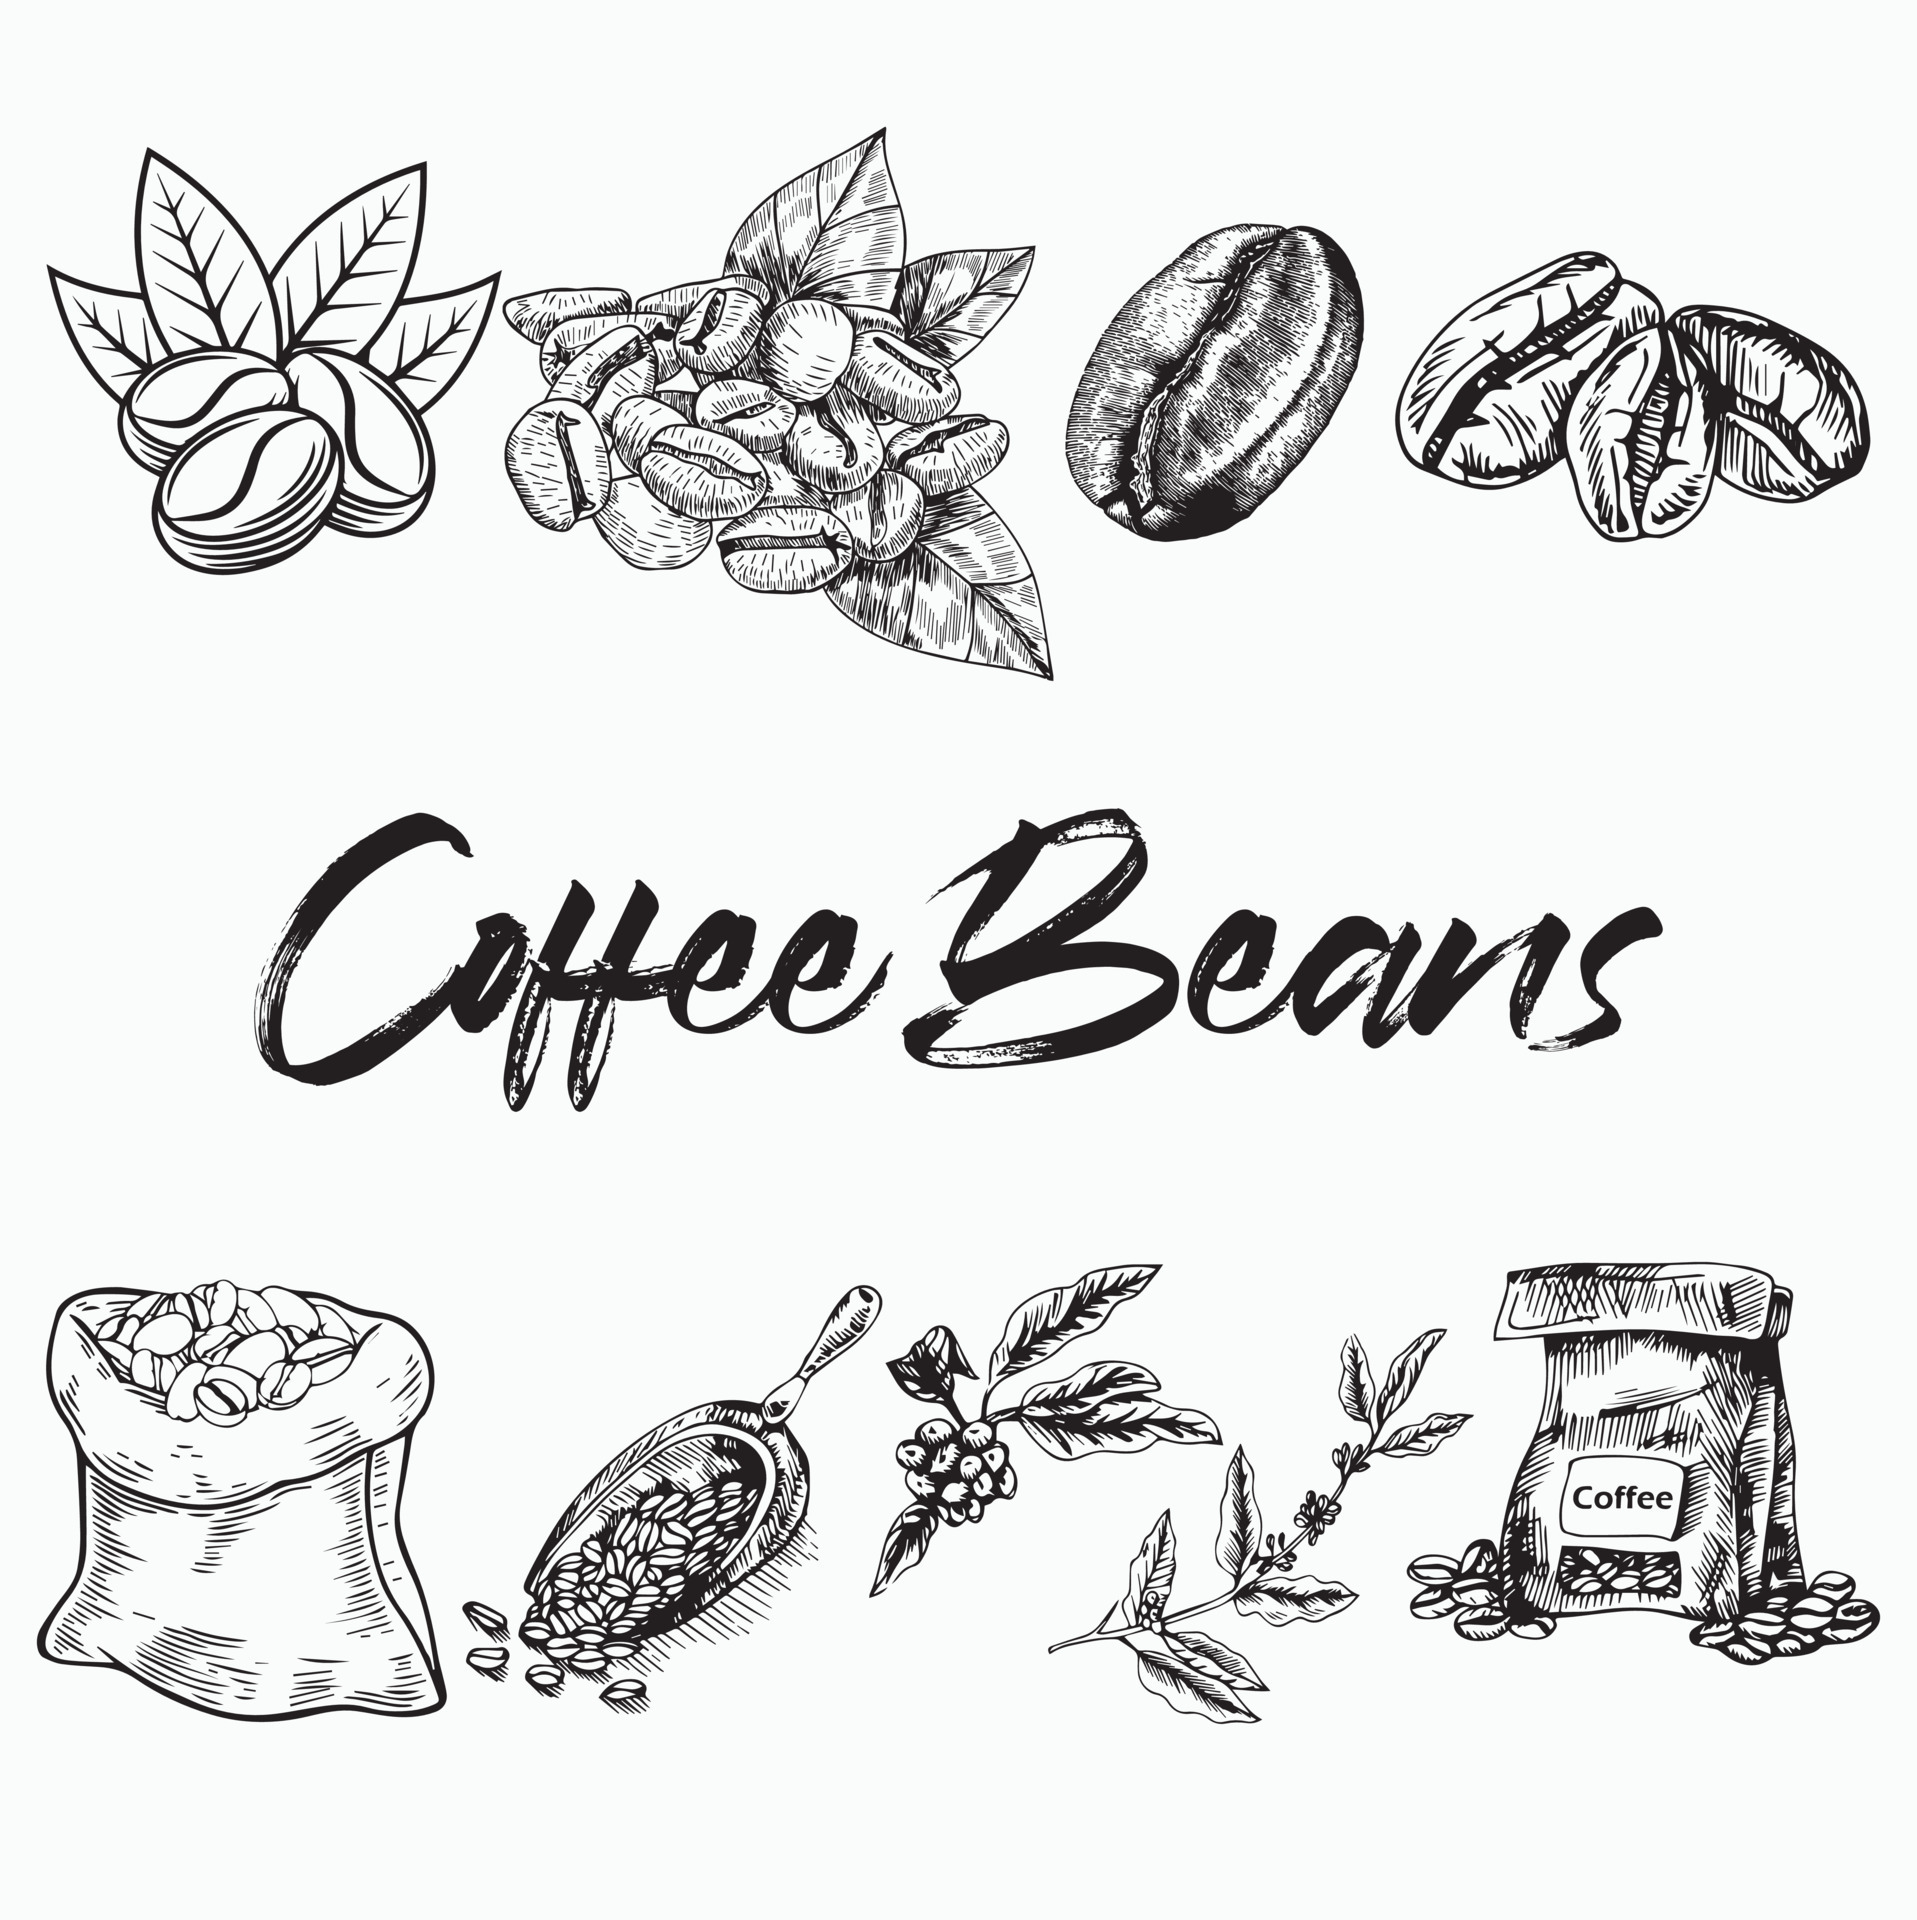 80% off Sale Coffee Bean Hand Drawn Vector Sketch of Coffee - Etsy